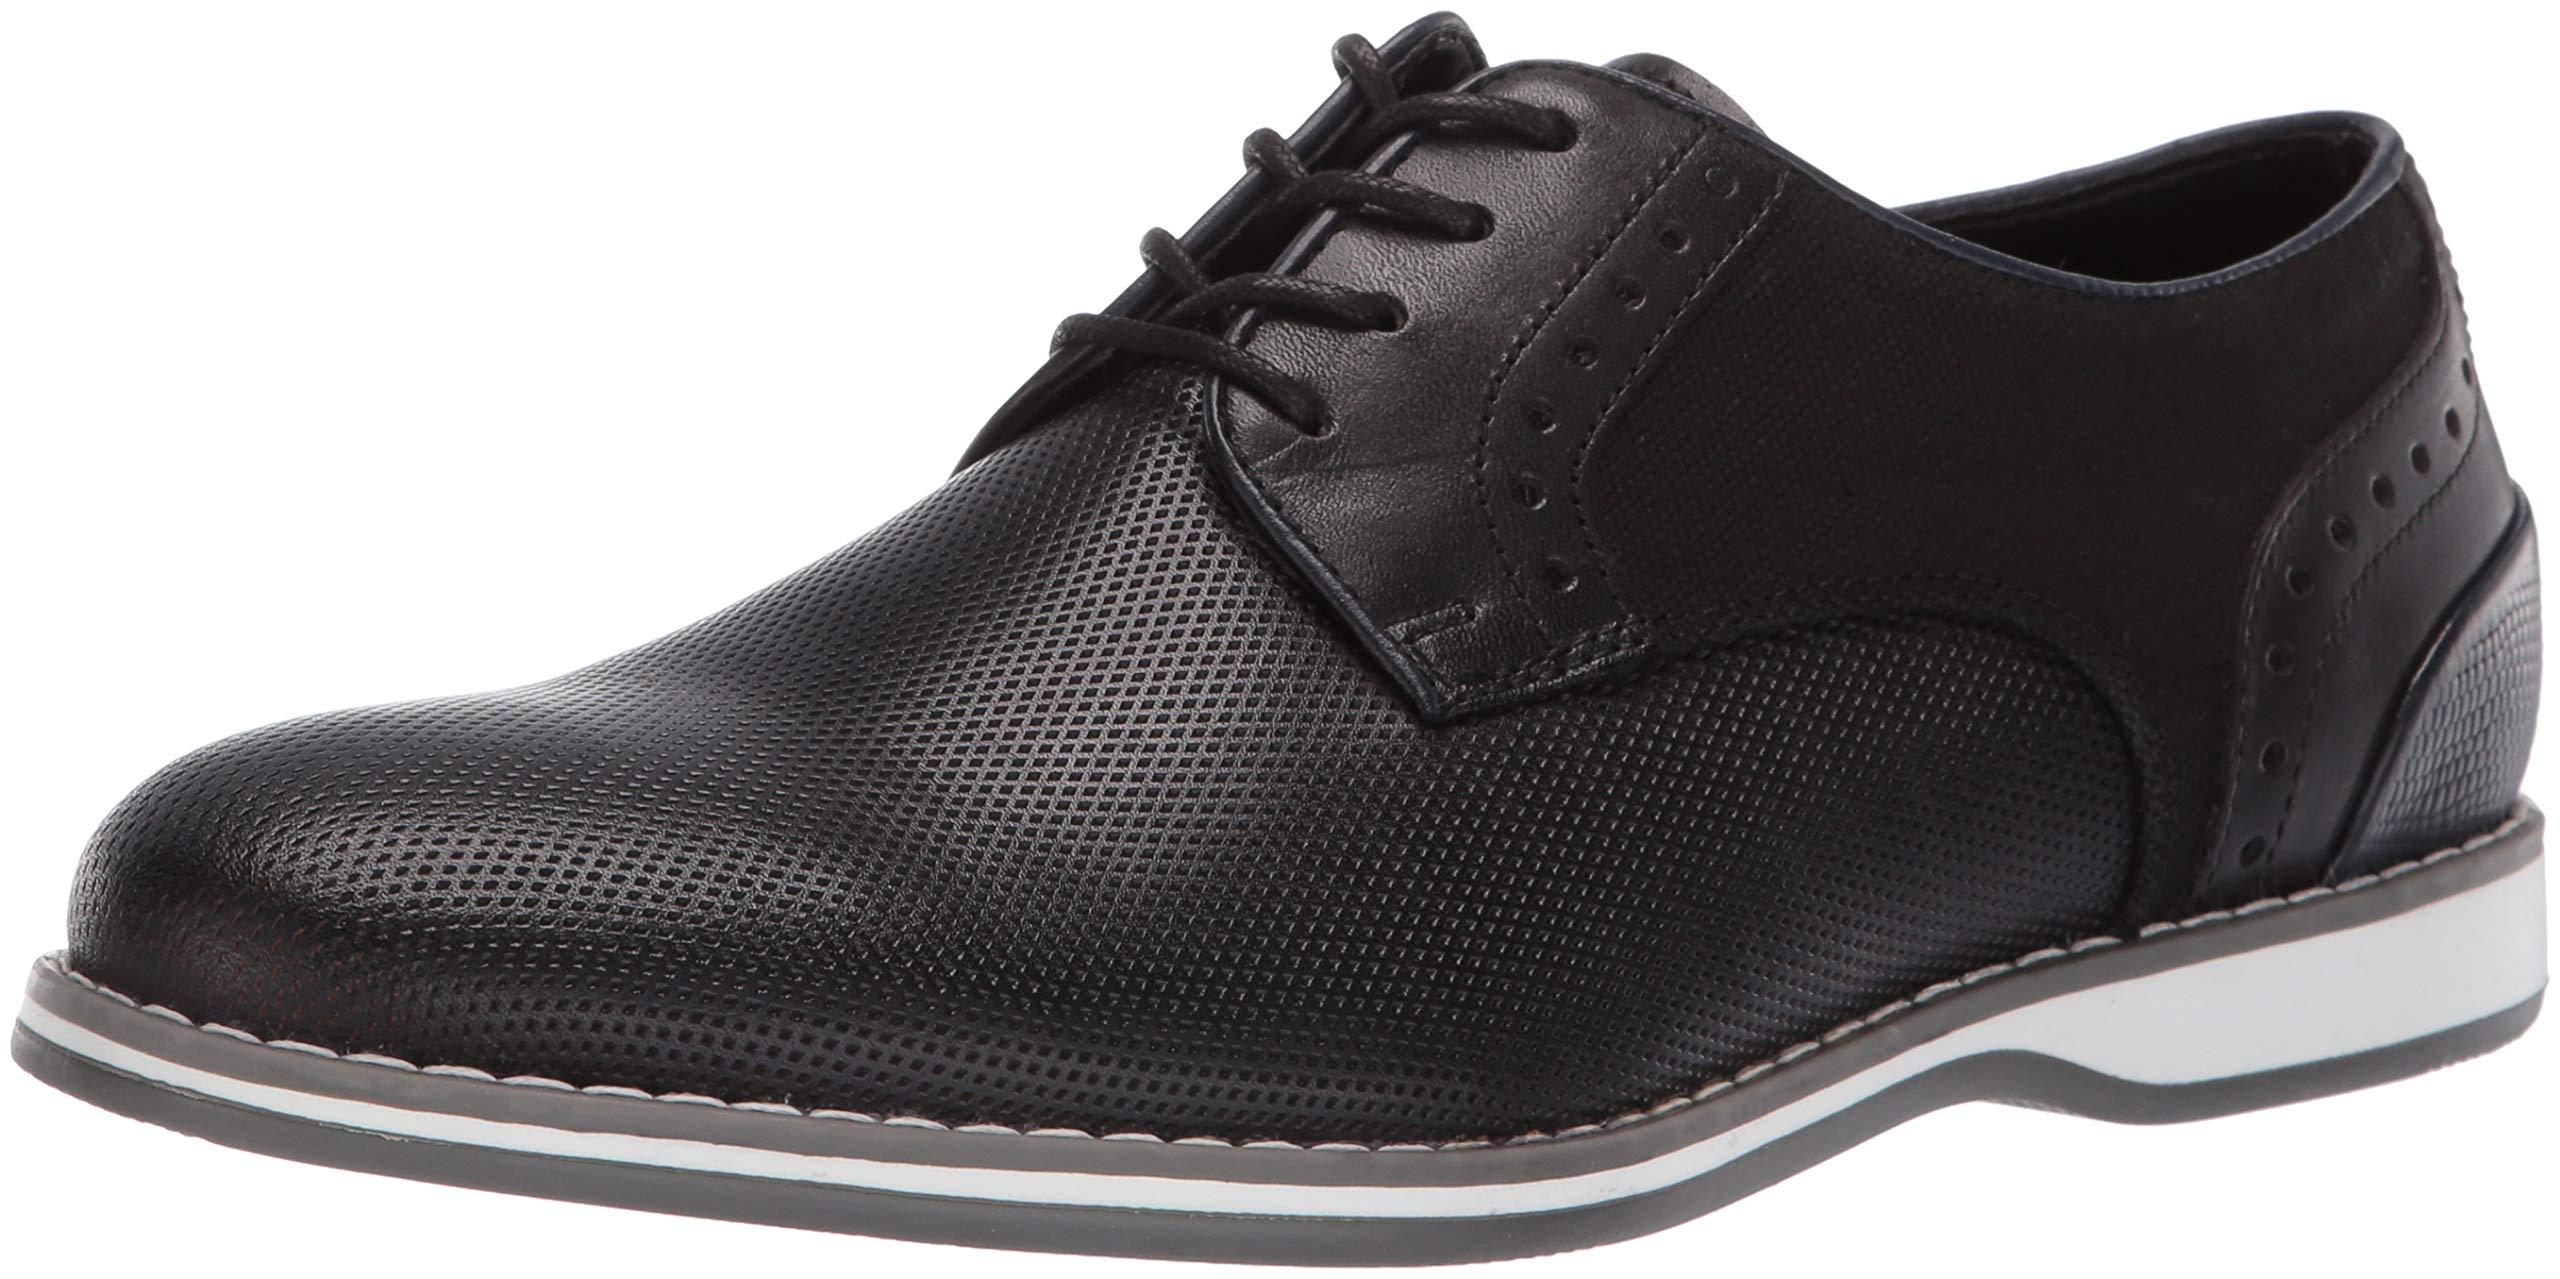 Kenneth Cole Reaction Weiser Lace Up B Oxford in Black for Men - Lyst